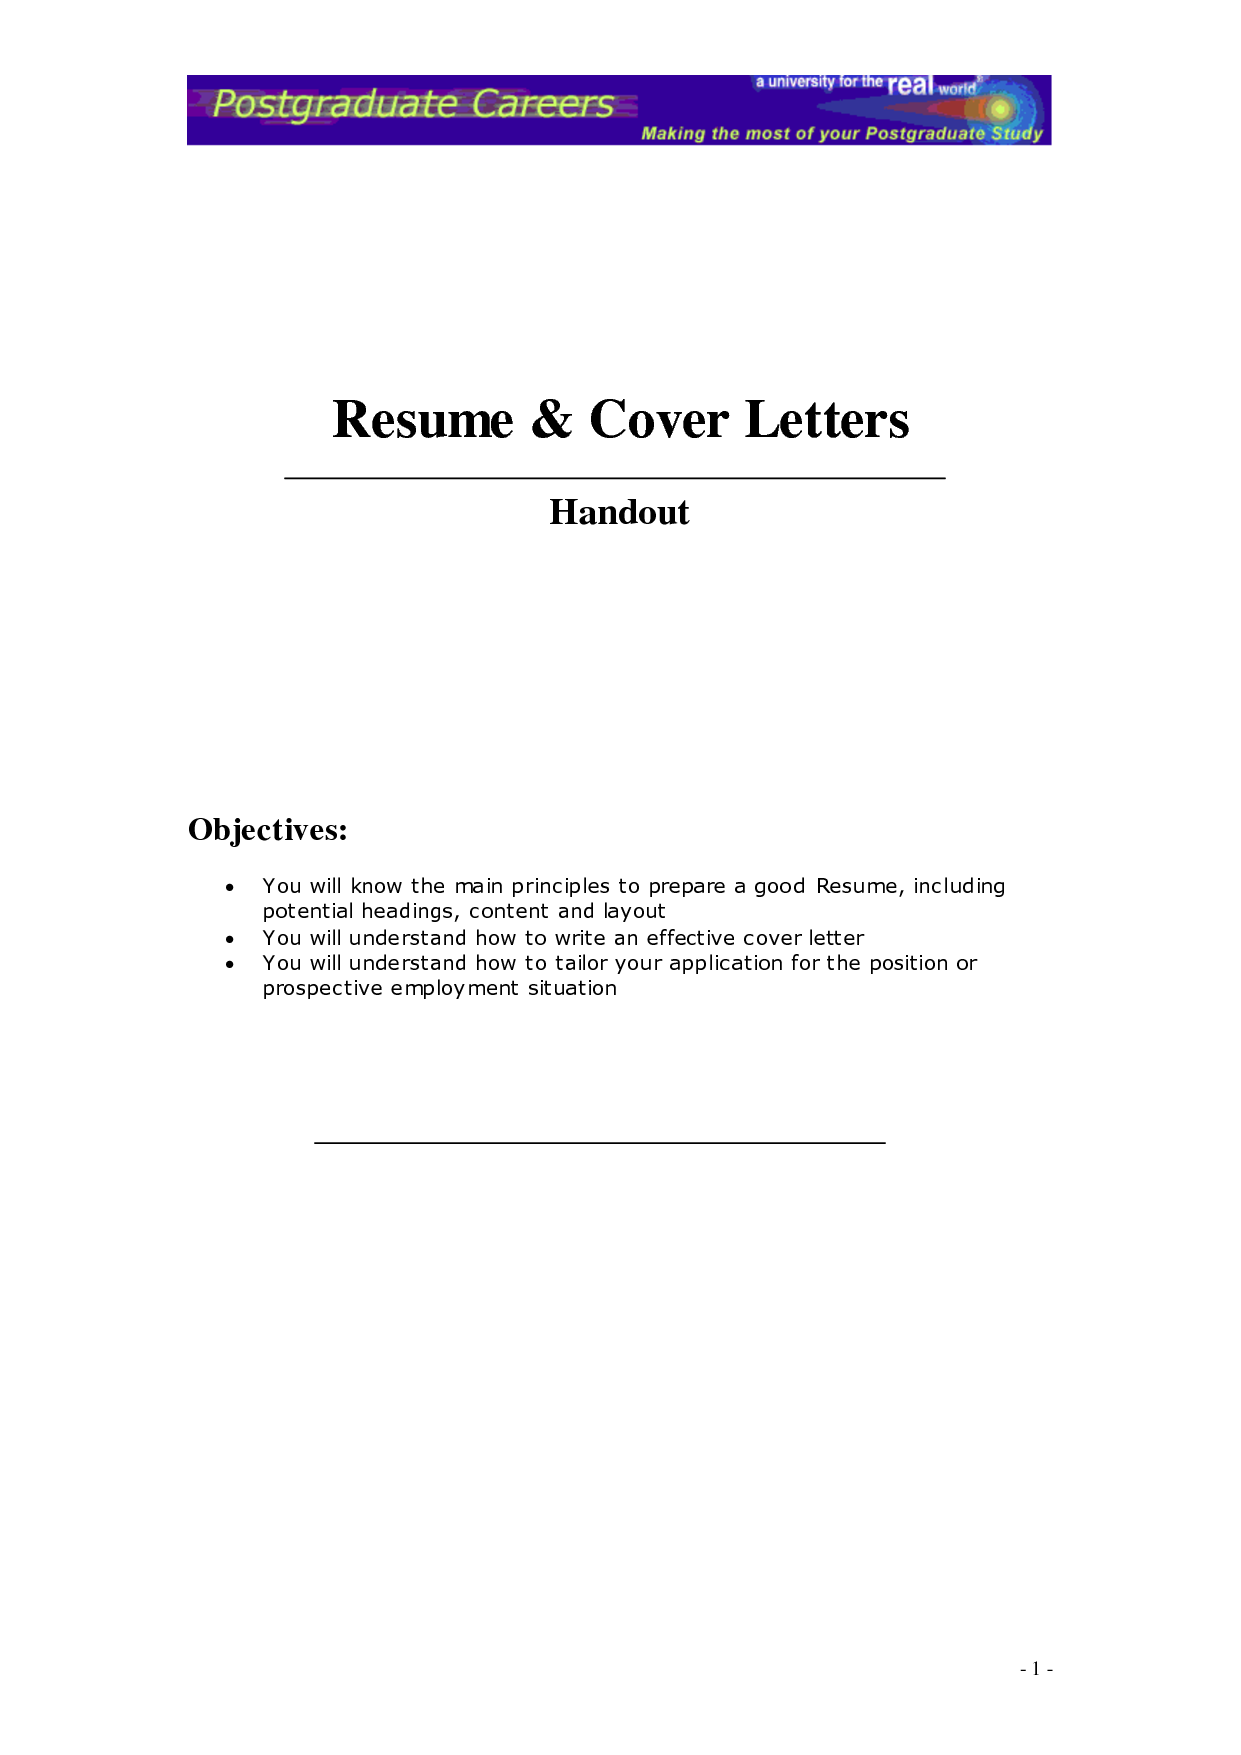 Include thesis title in resume